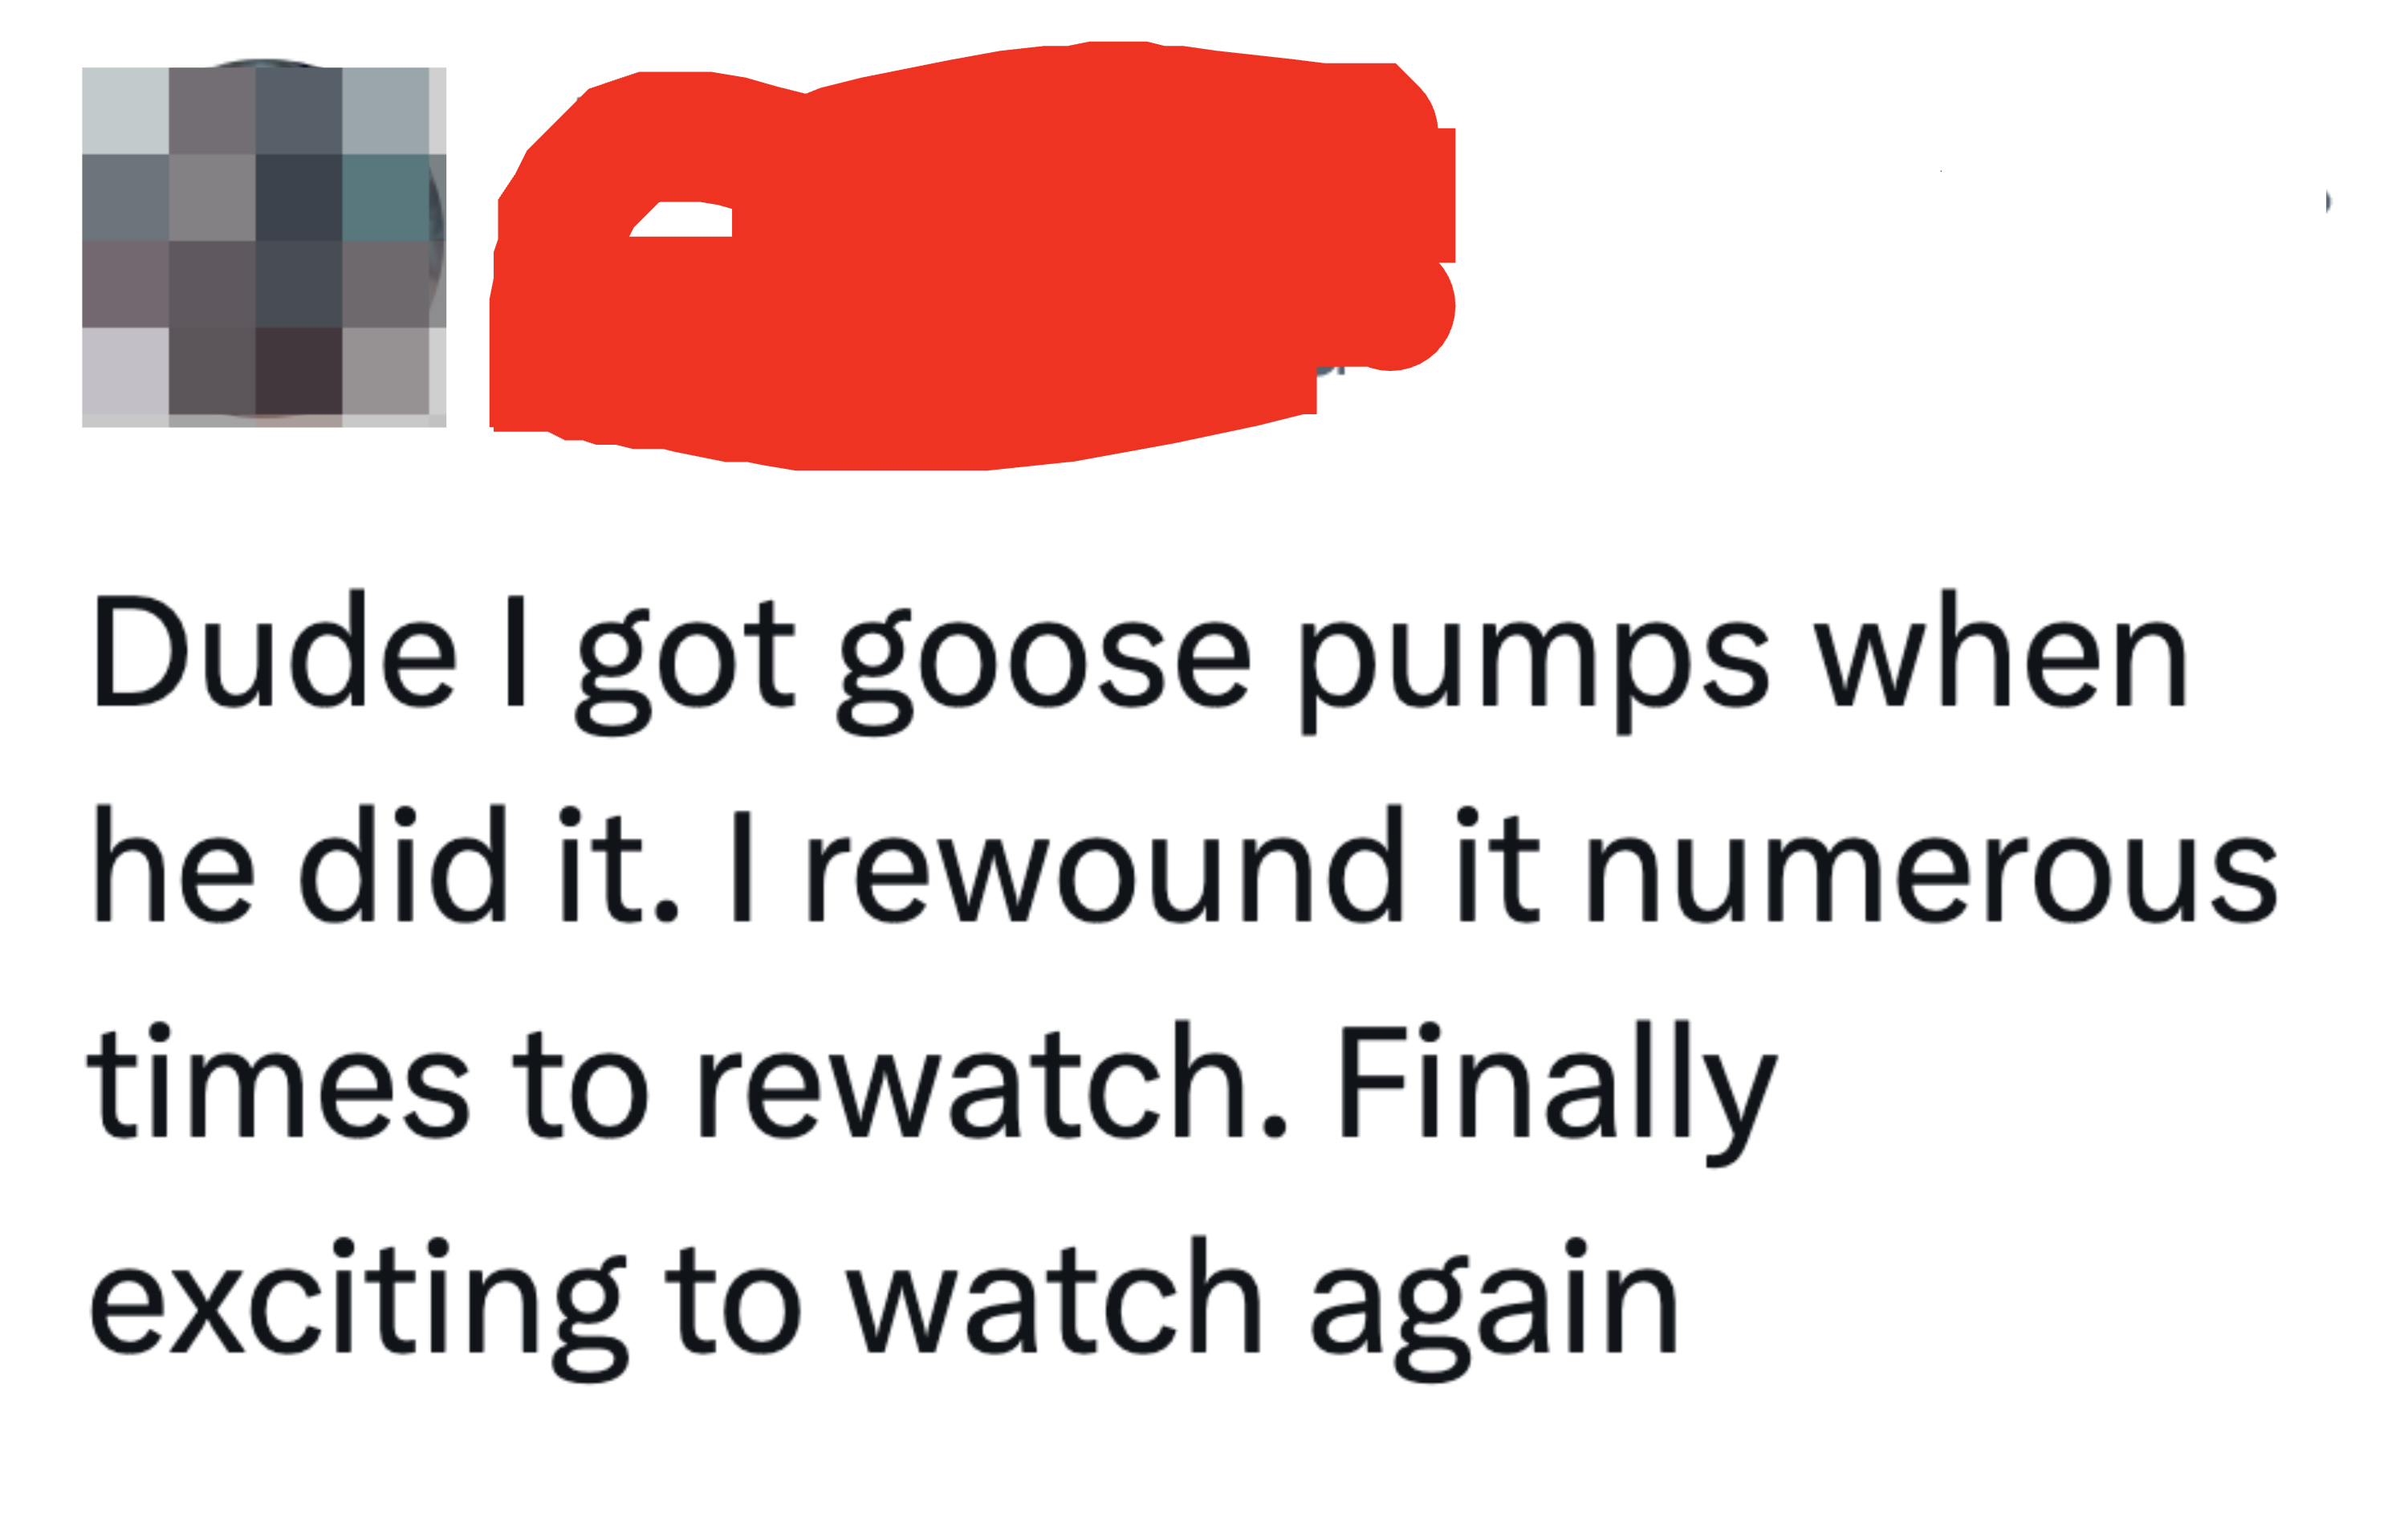 Someone says they have &quot;goose pumps&quot; instead of &quot;goosebumps&quot;